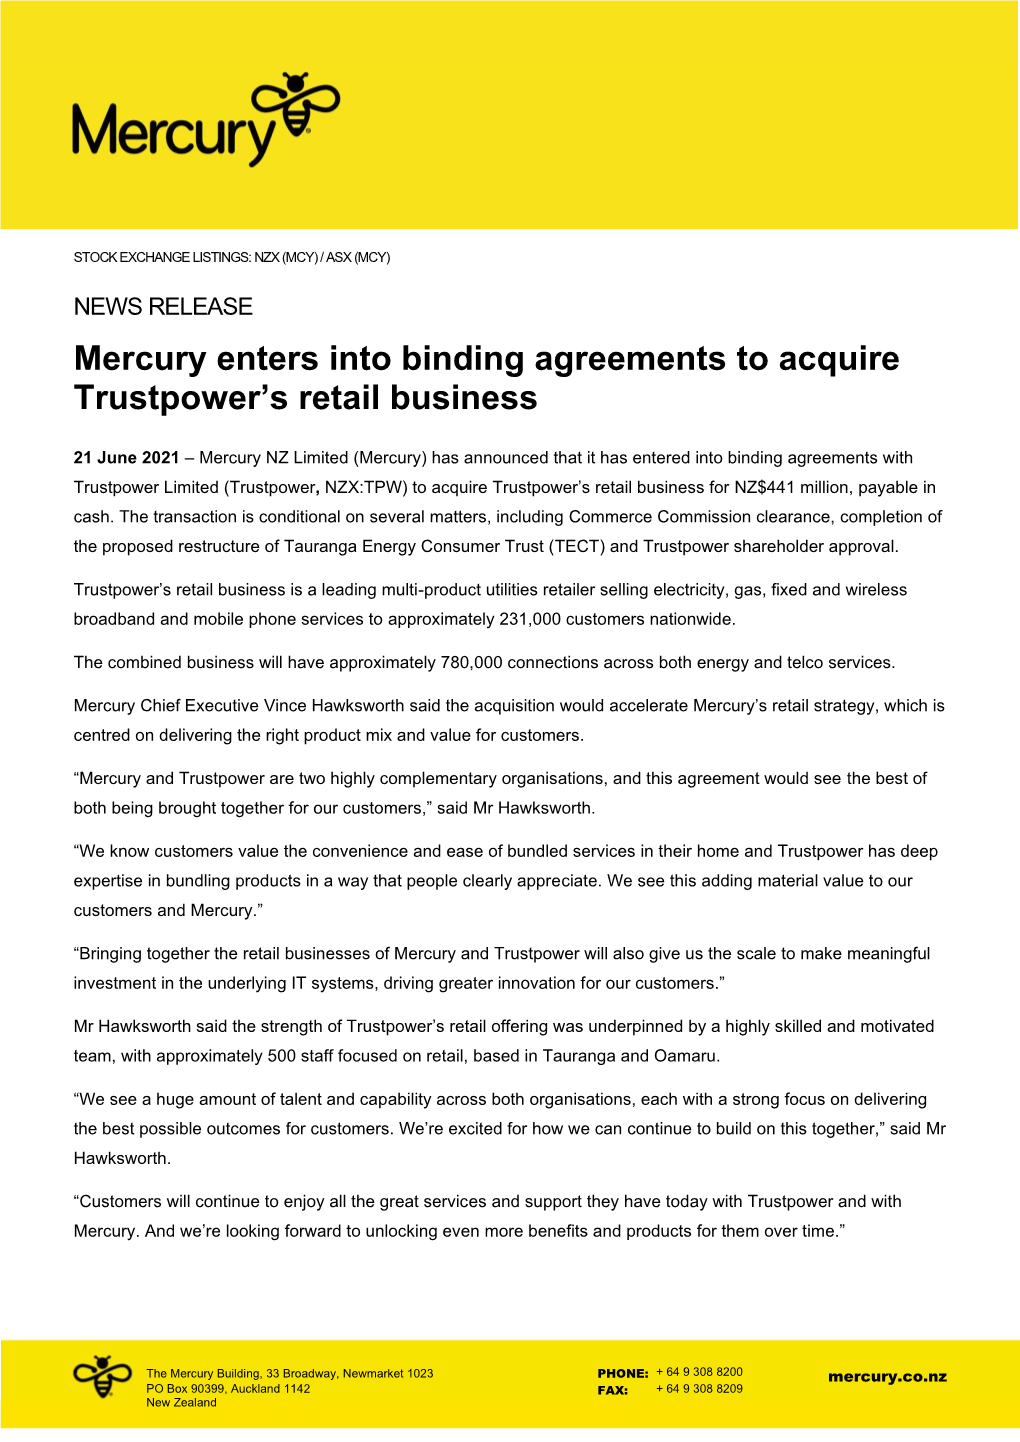 Mercury Enters Into Binding Agreements to Acquire Trustpower’S Retail Business